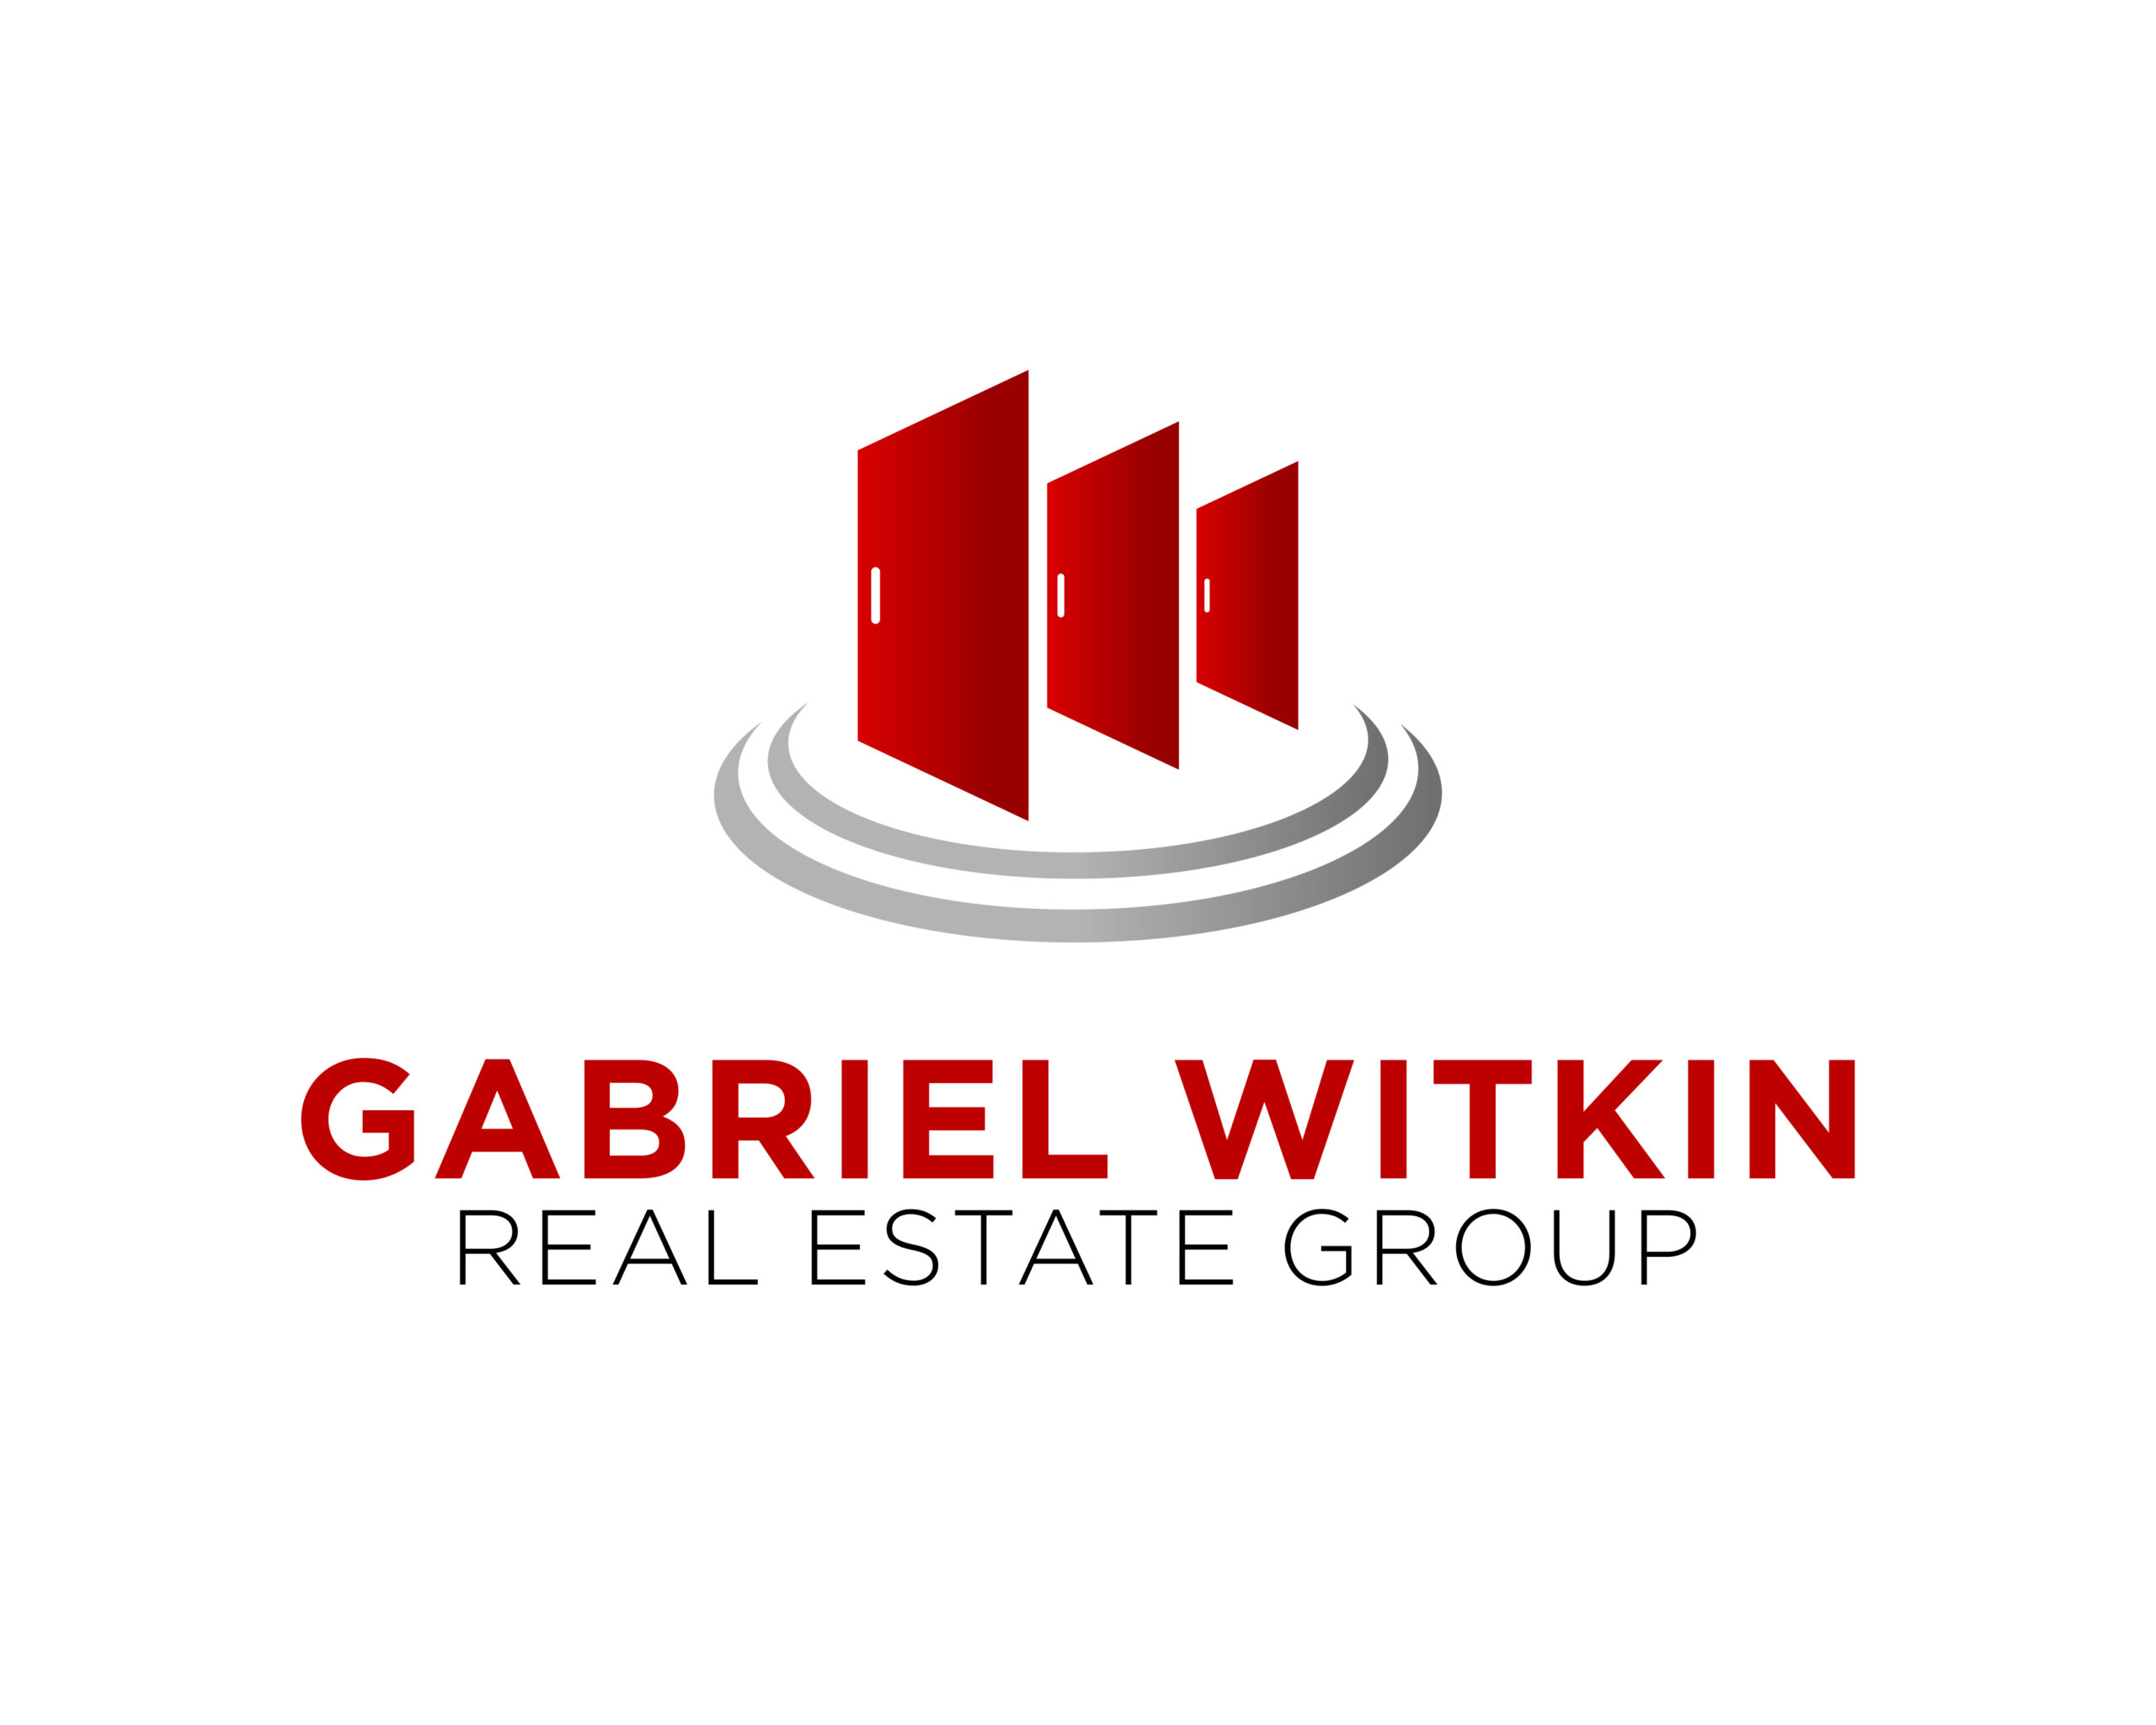 Gabriel Witkin Real Estate Group 2